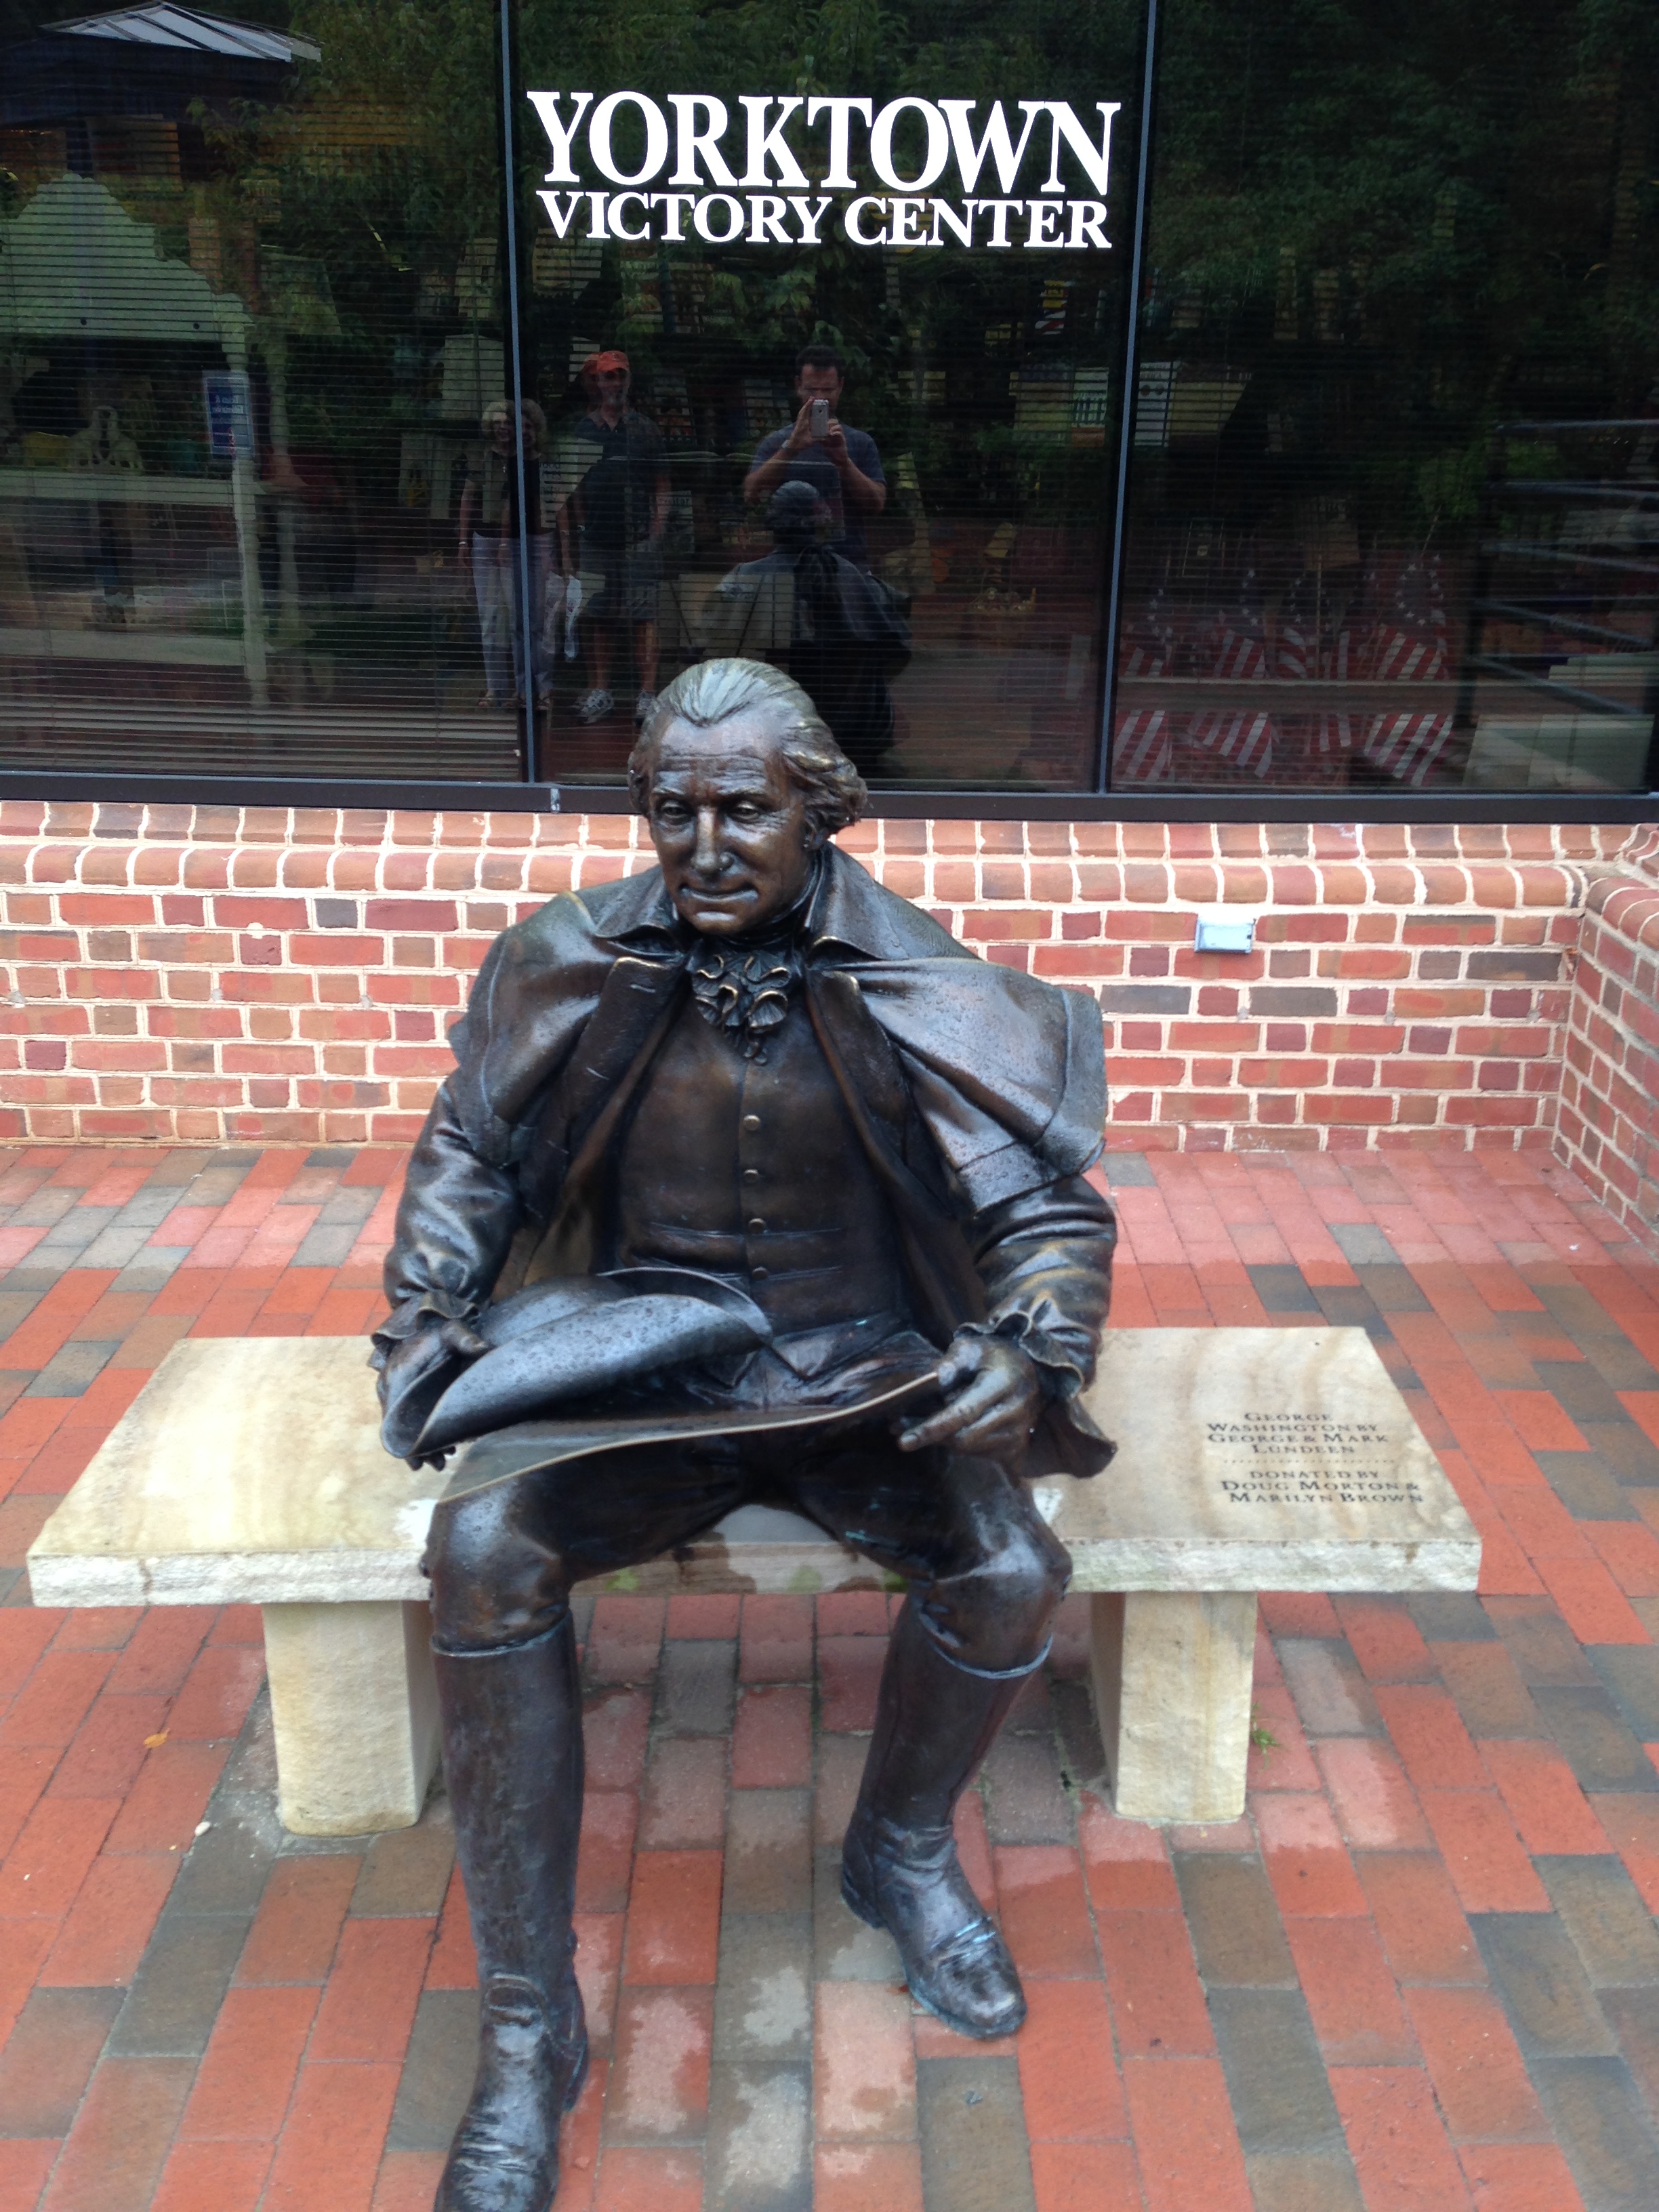  Outside the Yorktown Victory Center, George Washington sits in anxious contemplation of the ongoing siege. &nbsp;He also looks constipated.&nbsp; 